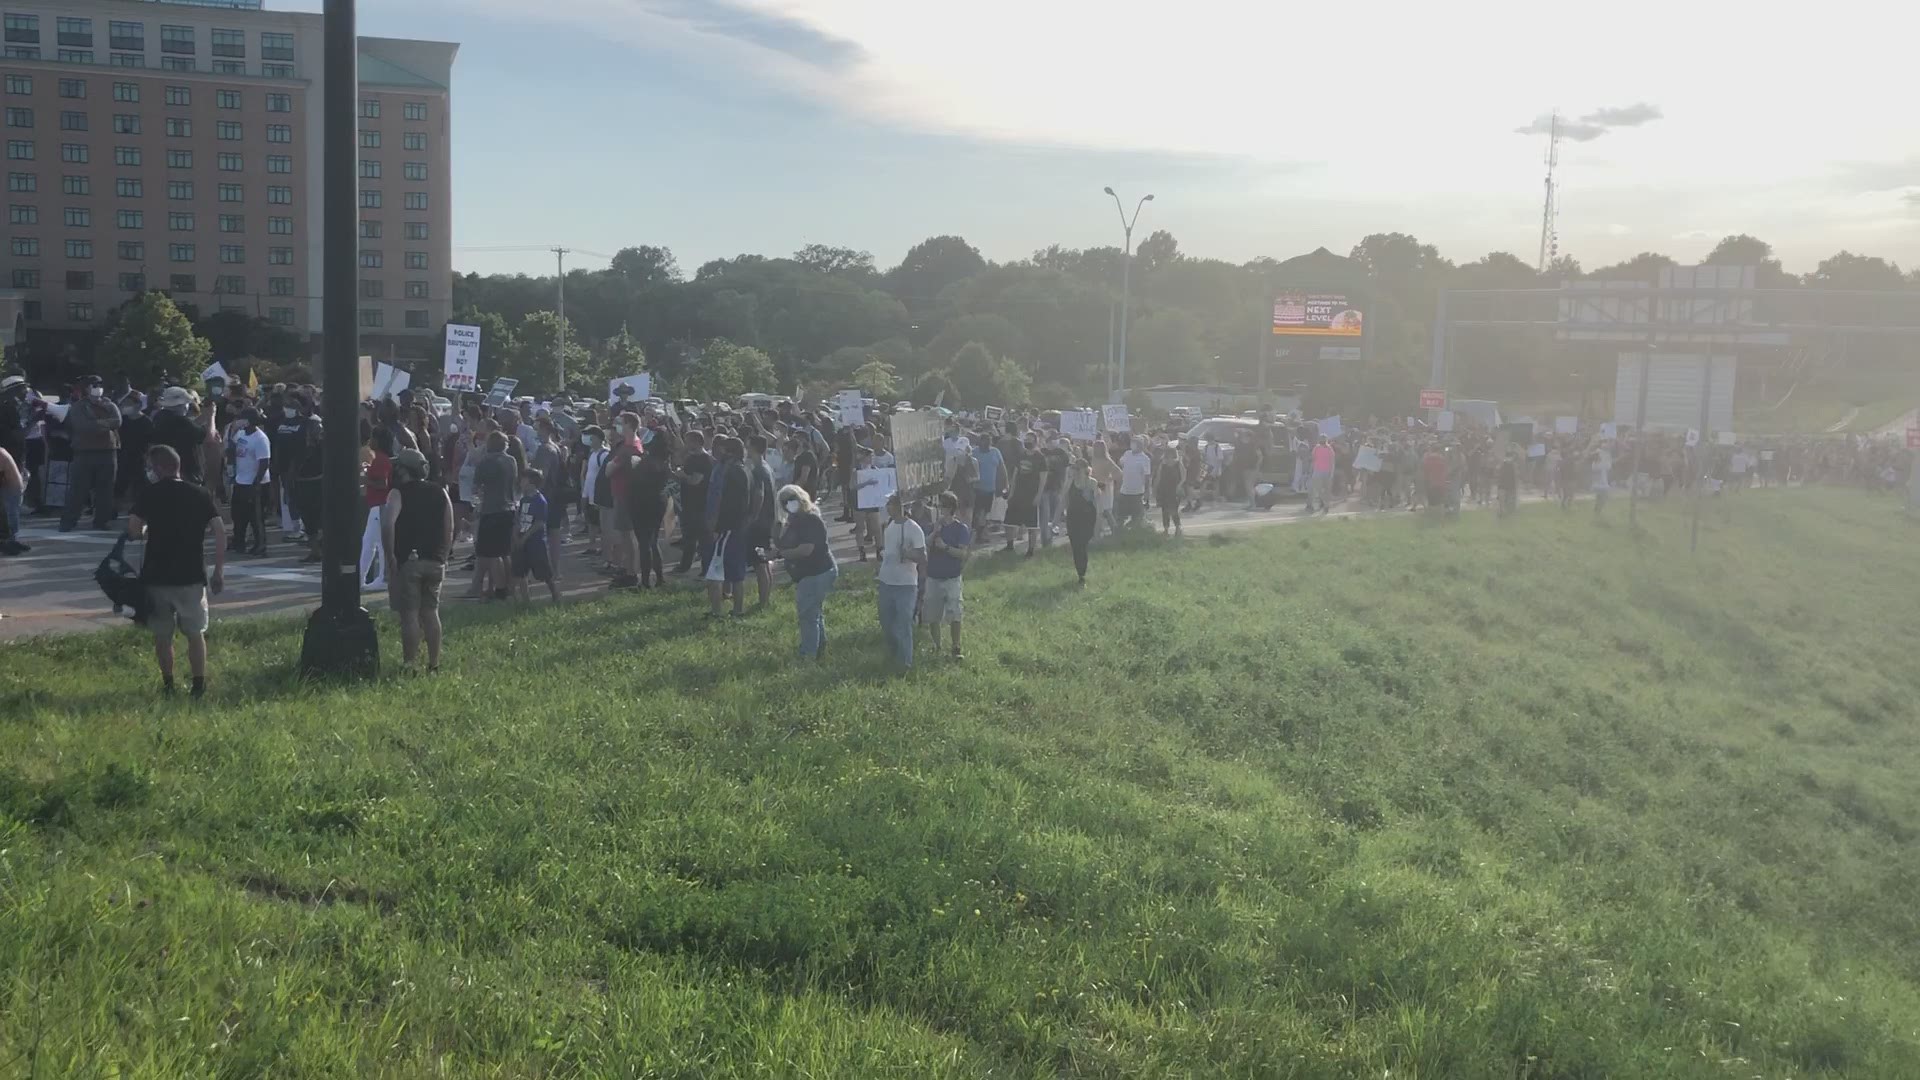 Protesters attempted to get onto I-70 in St. Charles